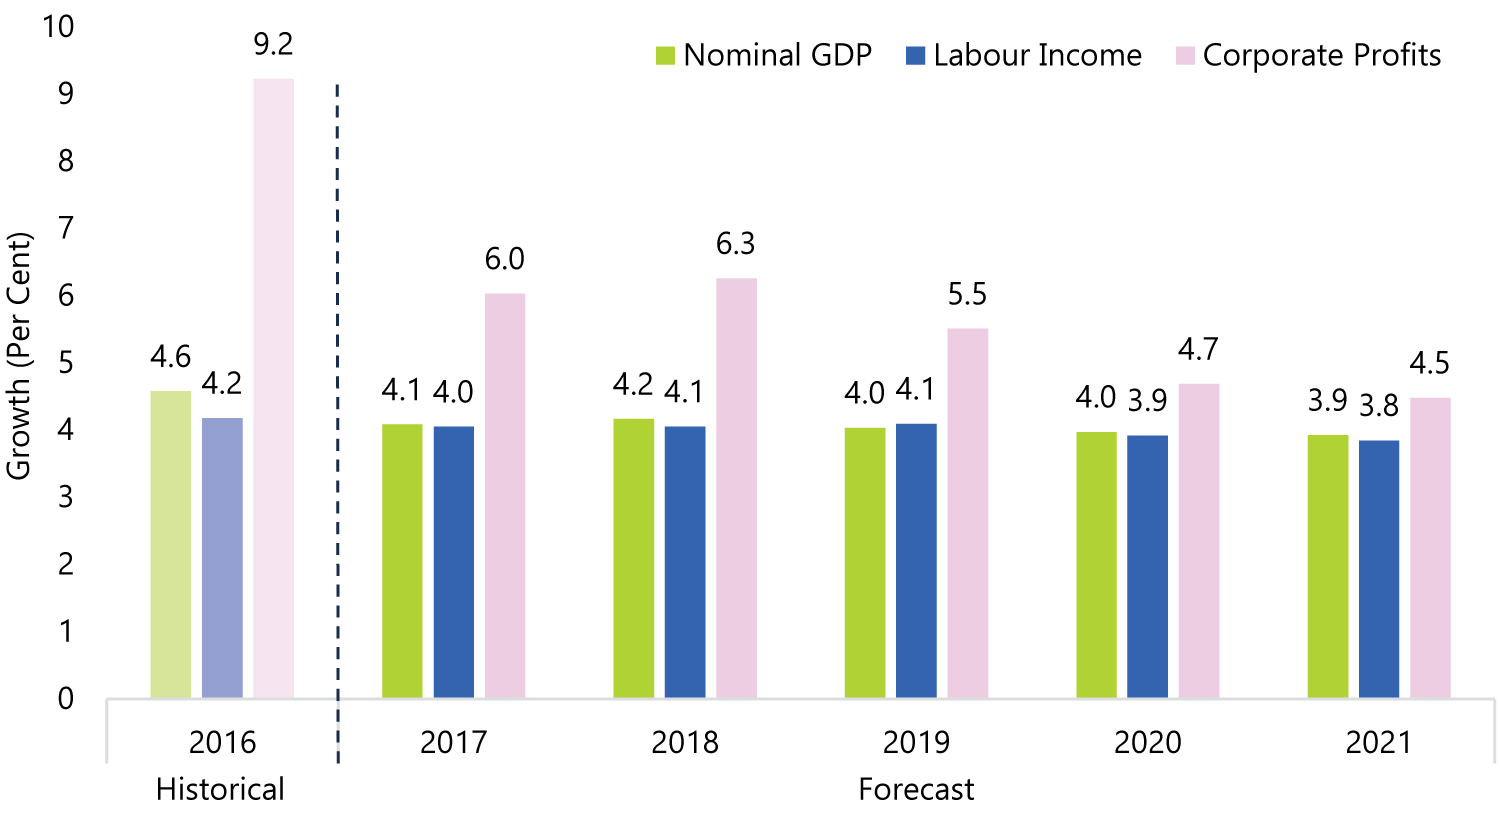 Labour Income and Corporate Profits Support Nominal GDP Growth